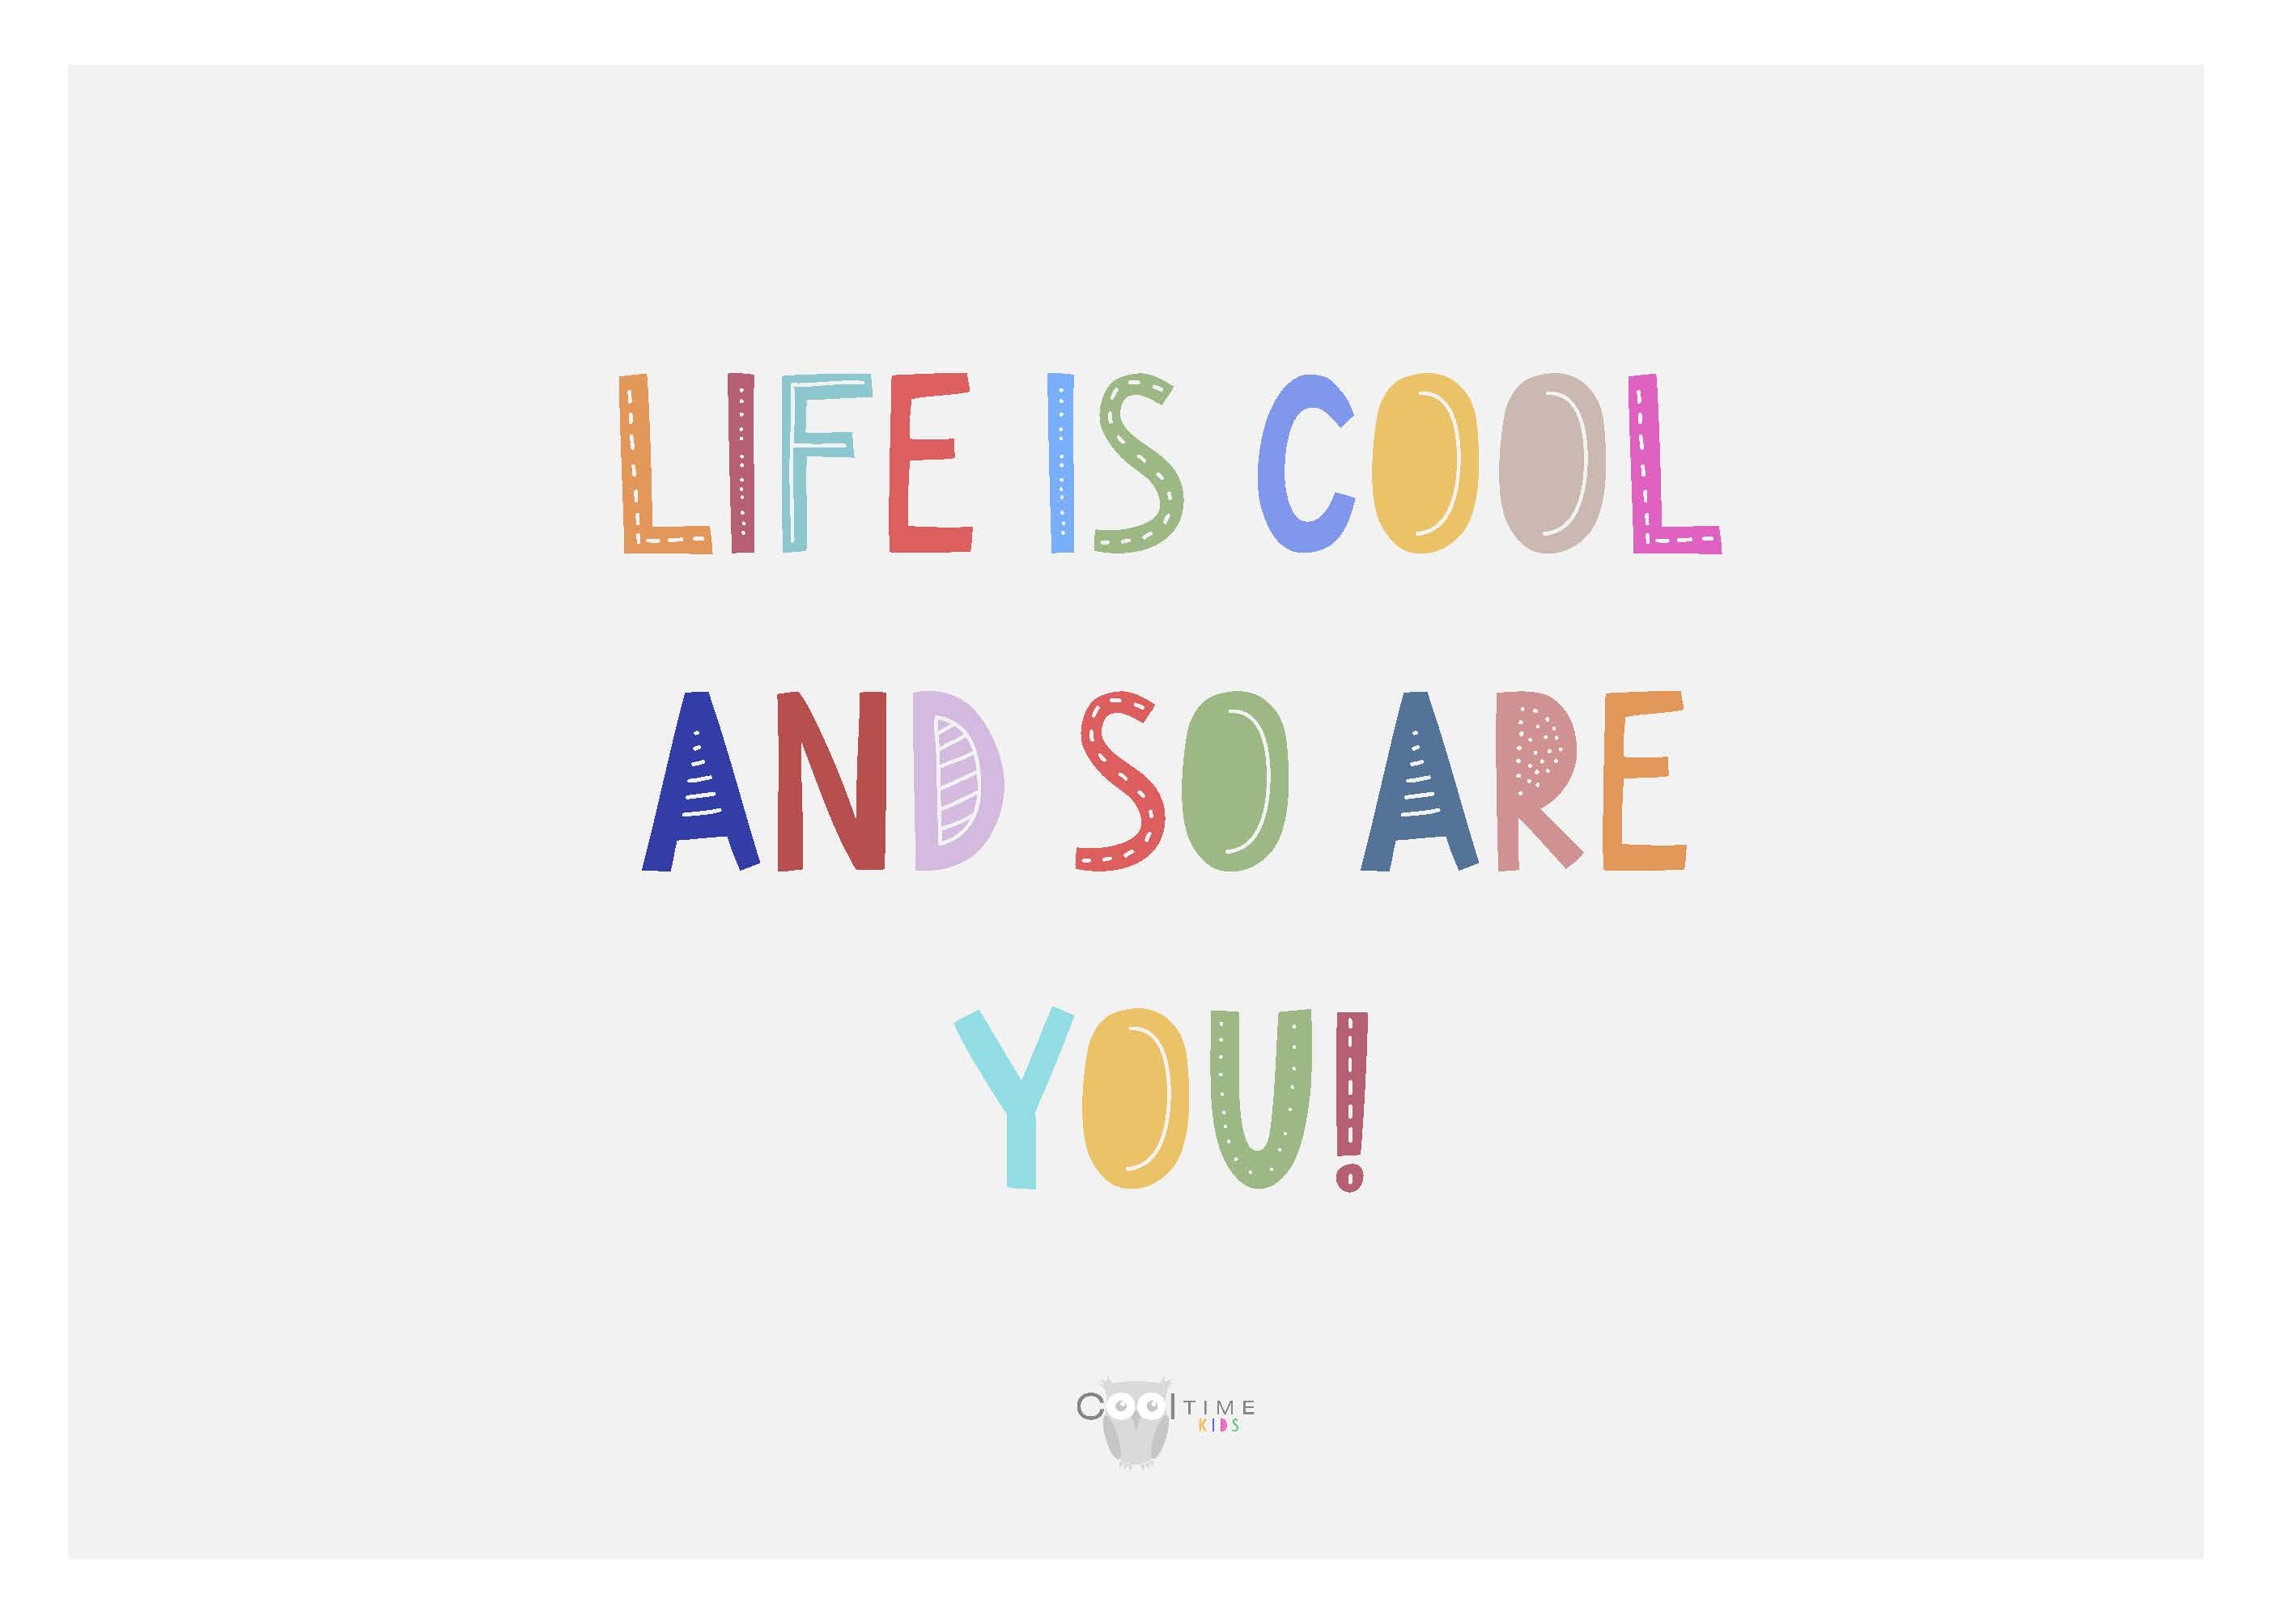 Life is cool and so are you!